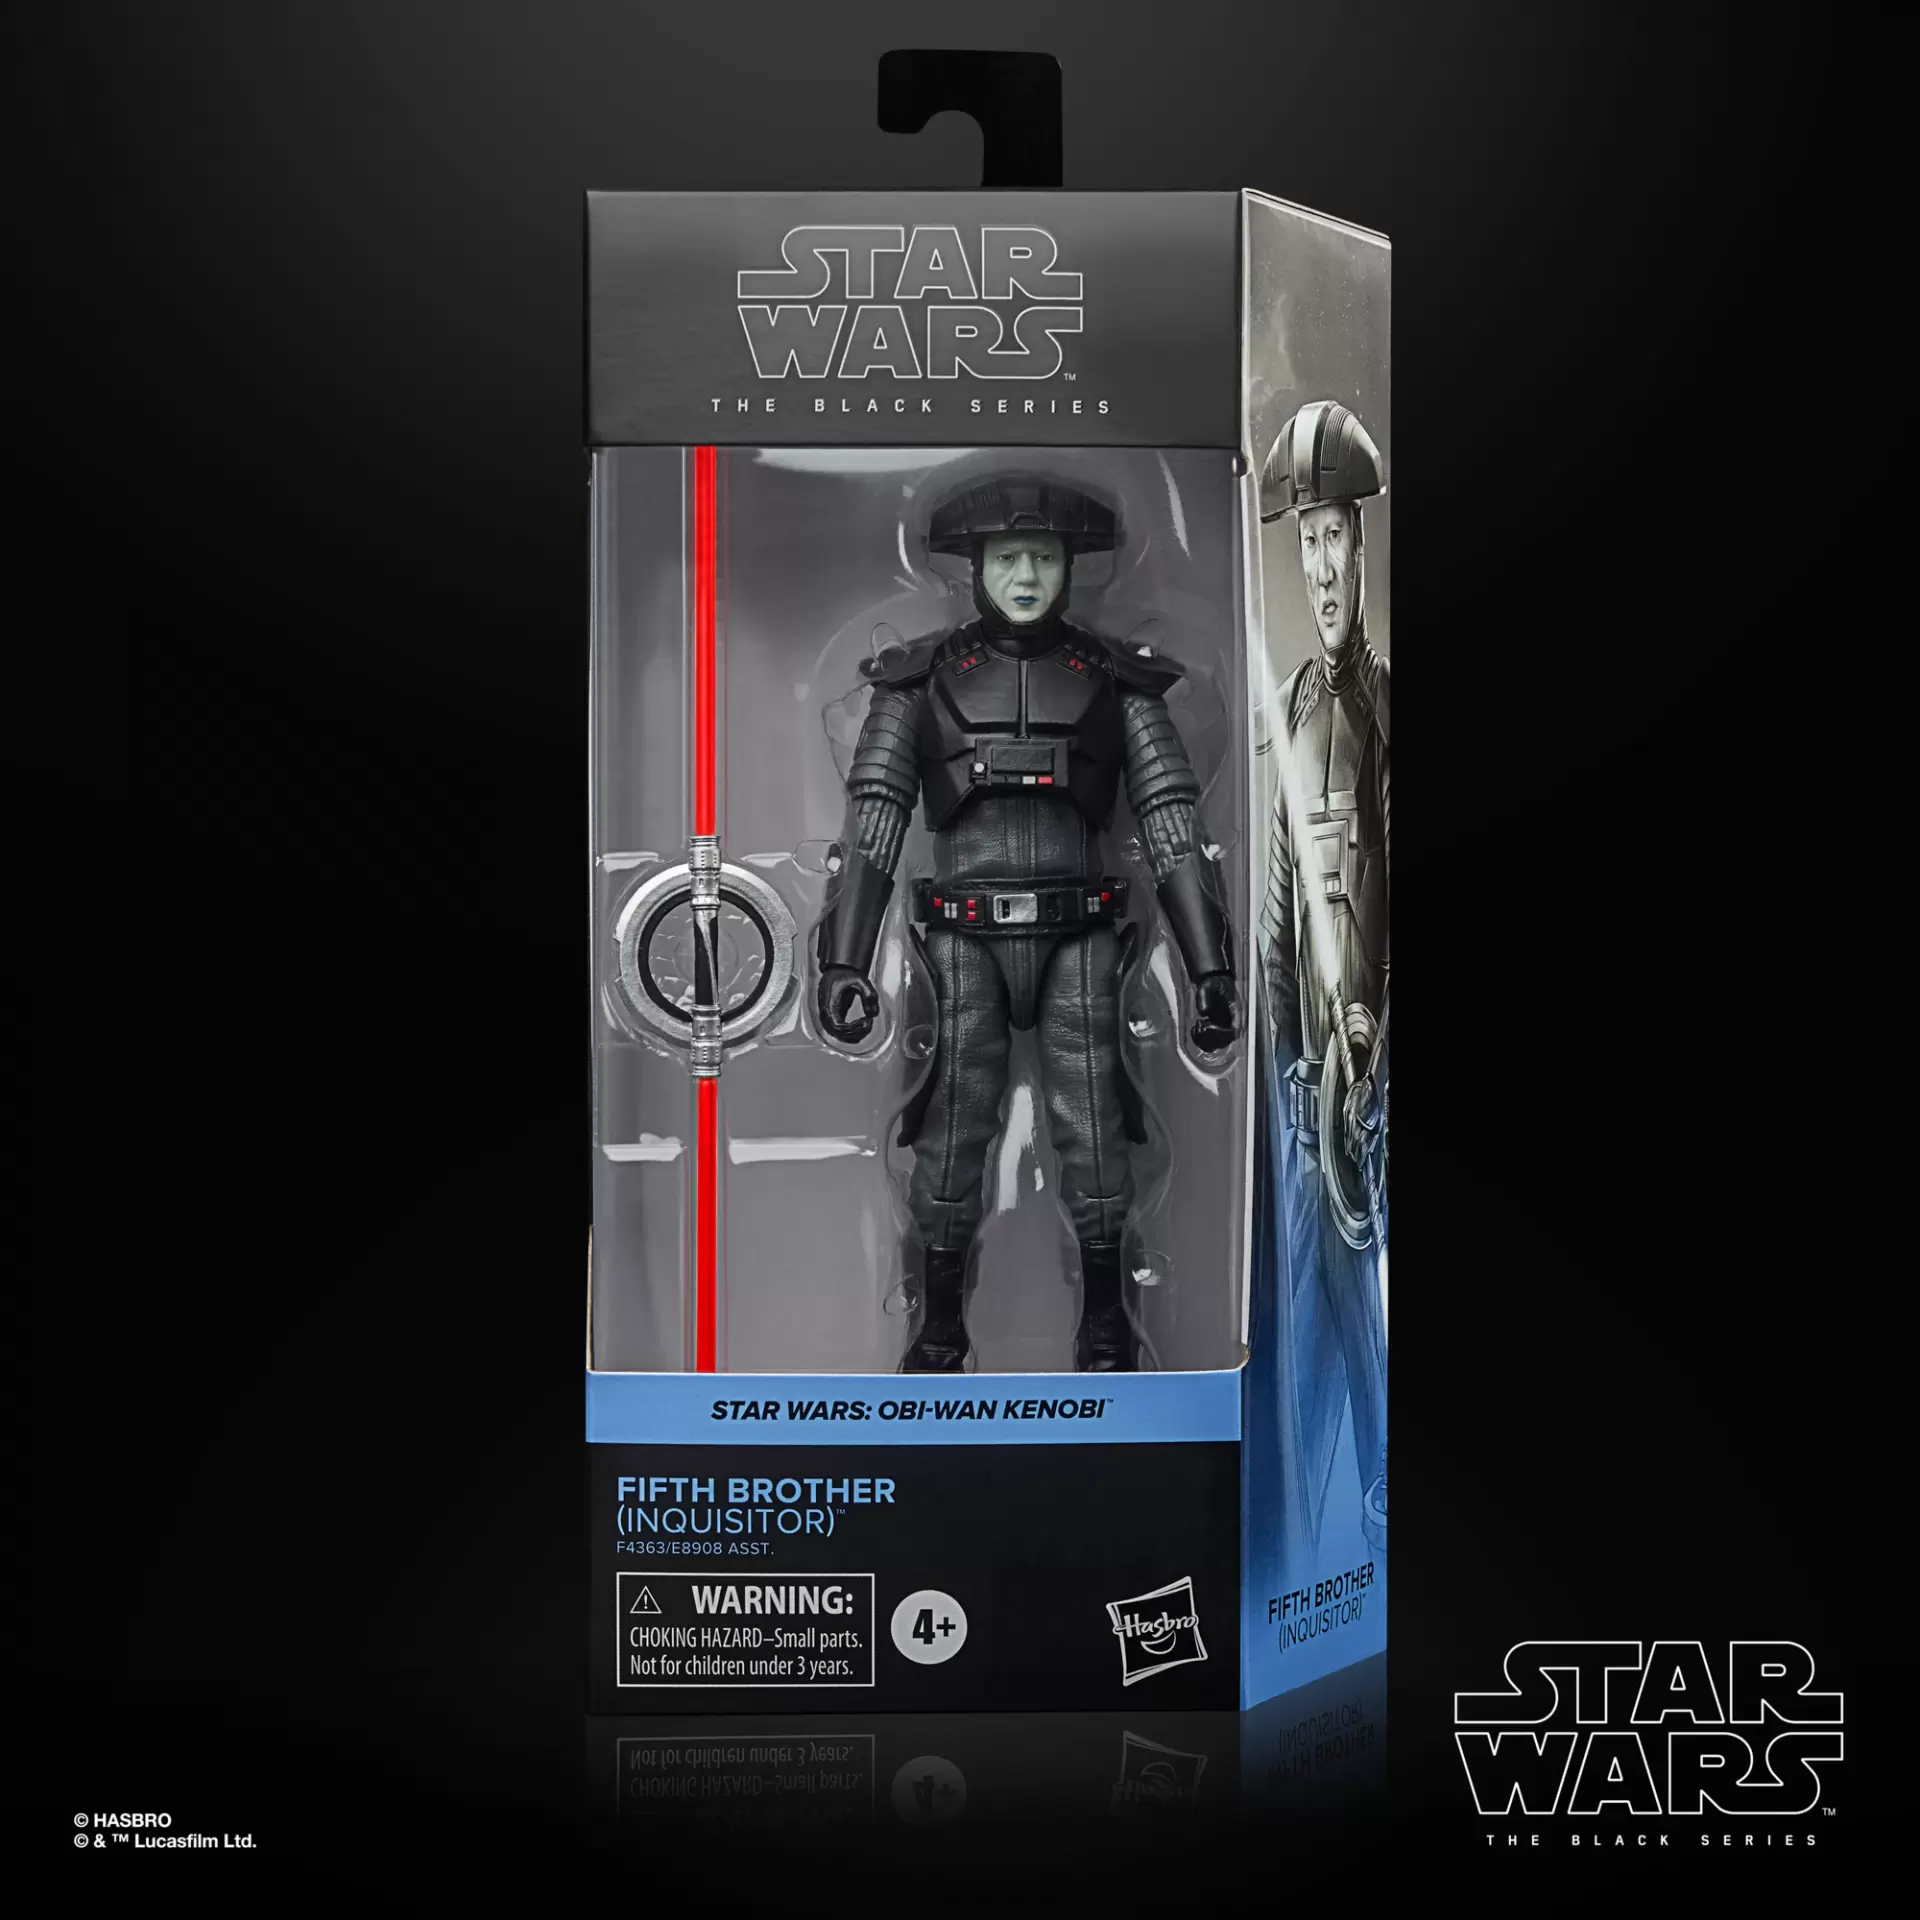 Star wars the black series fifth brother inquisitor jawascave 3